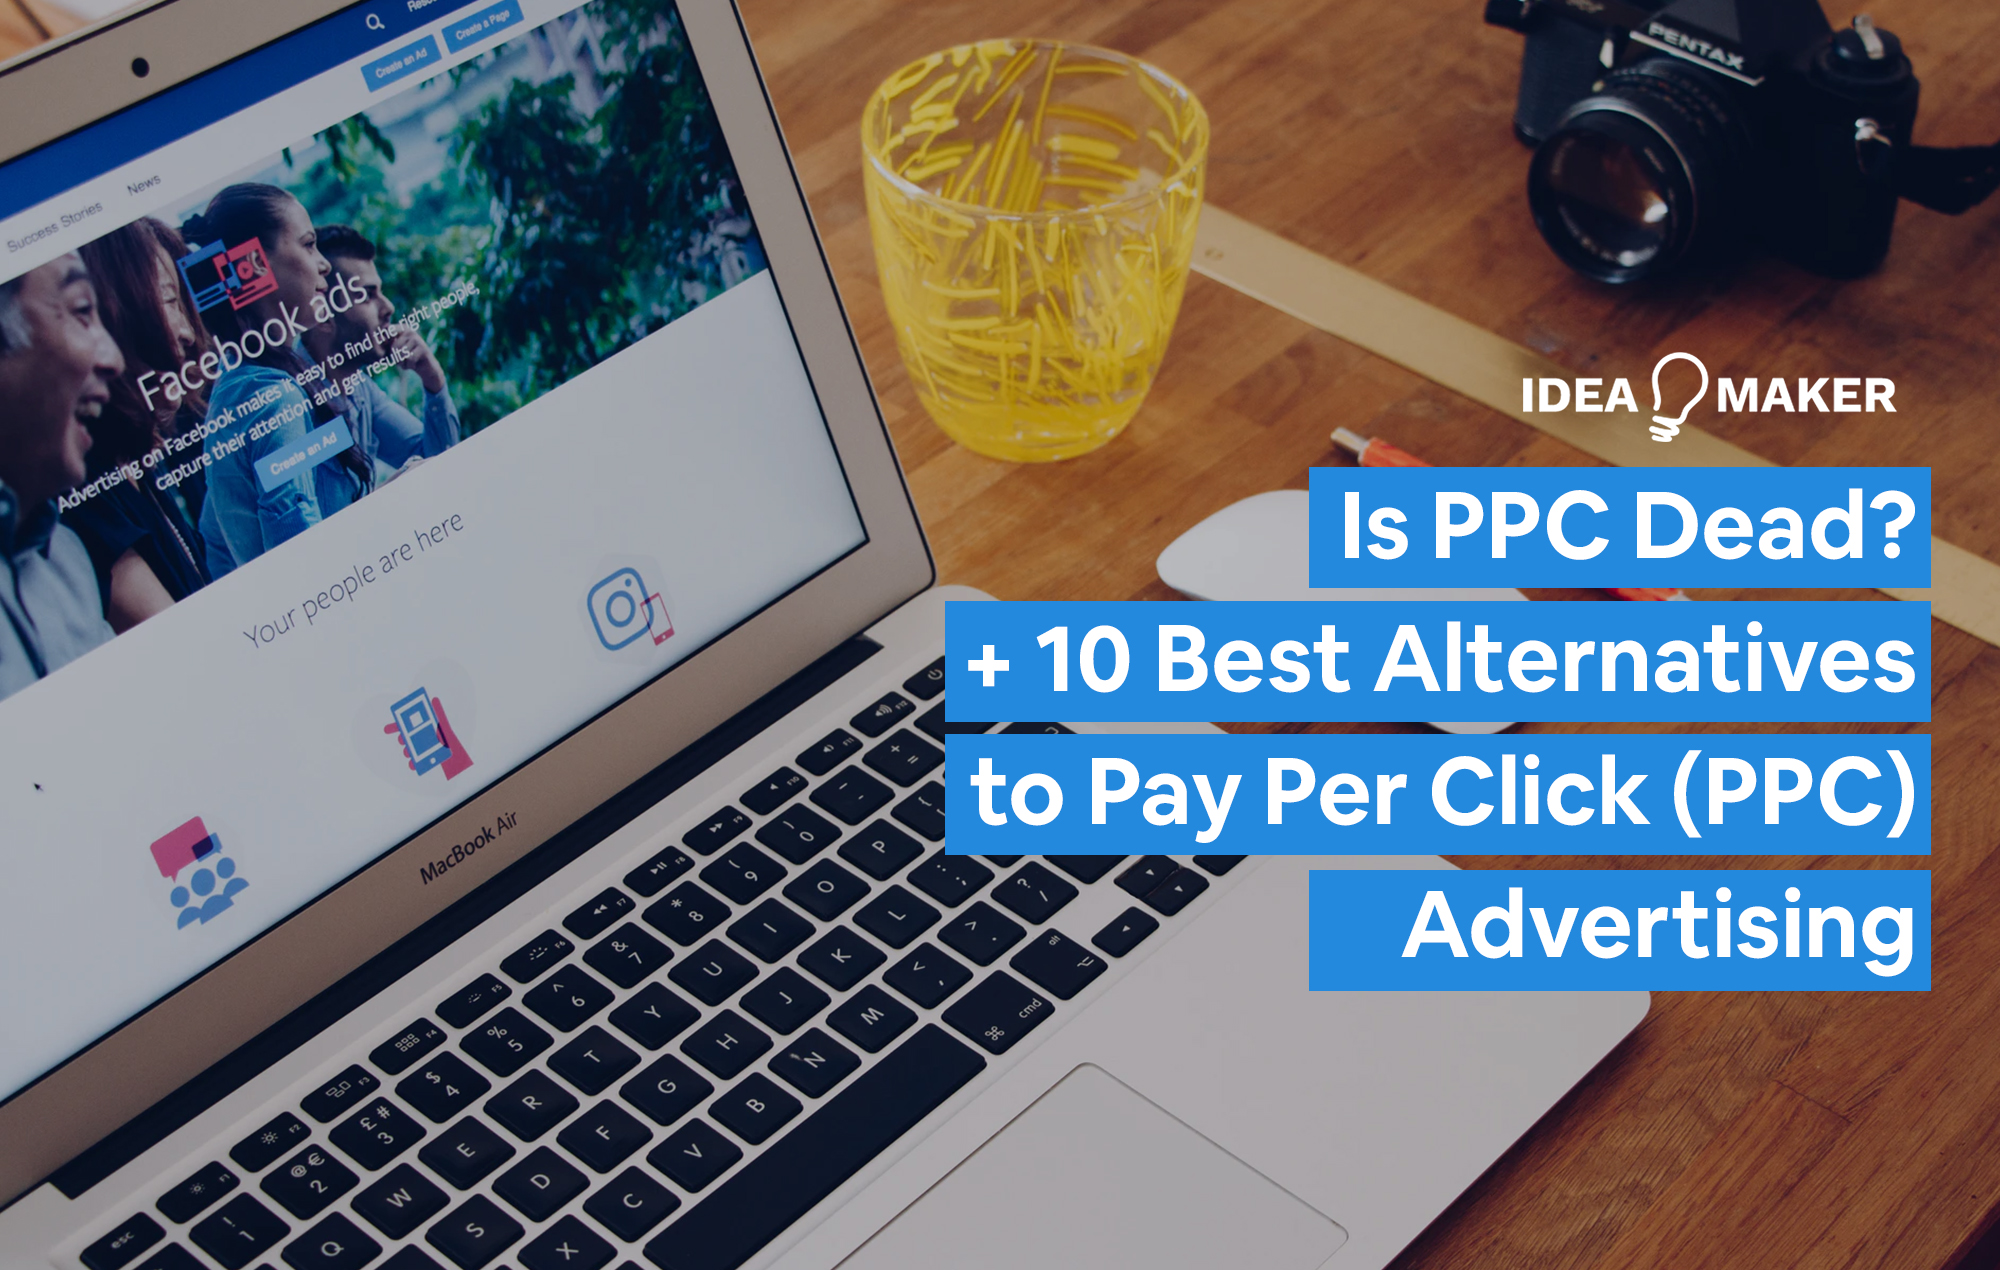 Is PPC Dead? + 10 Best Alternatives to Pay-Per-Click (PPC) Advertising